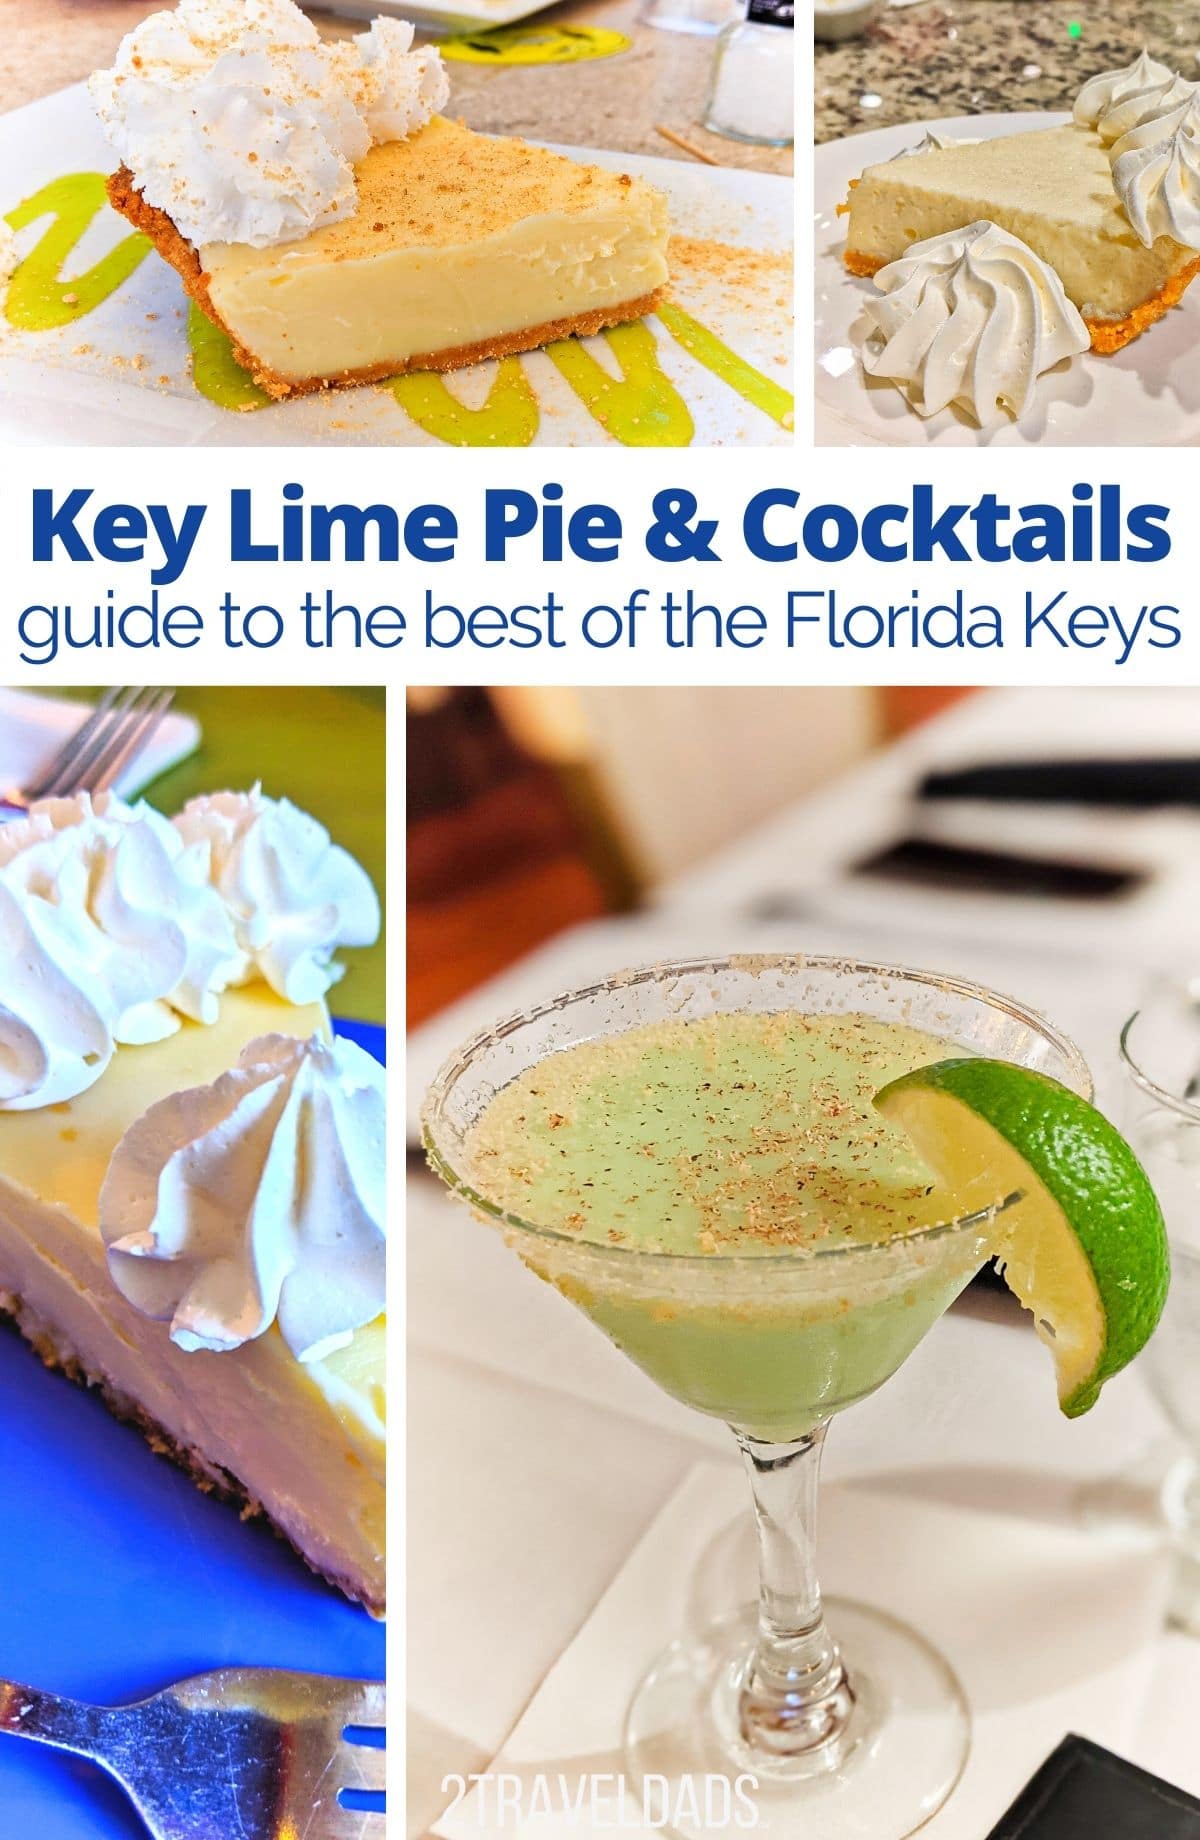 The best key lime pie in Key West and the Florida Keys is worth finding. From pie slices to key lime cocktails, key lime pie on a stick to the history of key lime pie, this is the guide to answer all your questions.